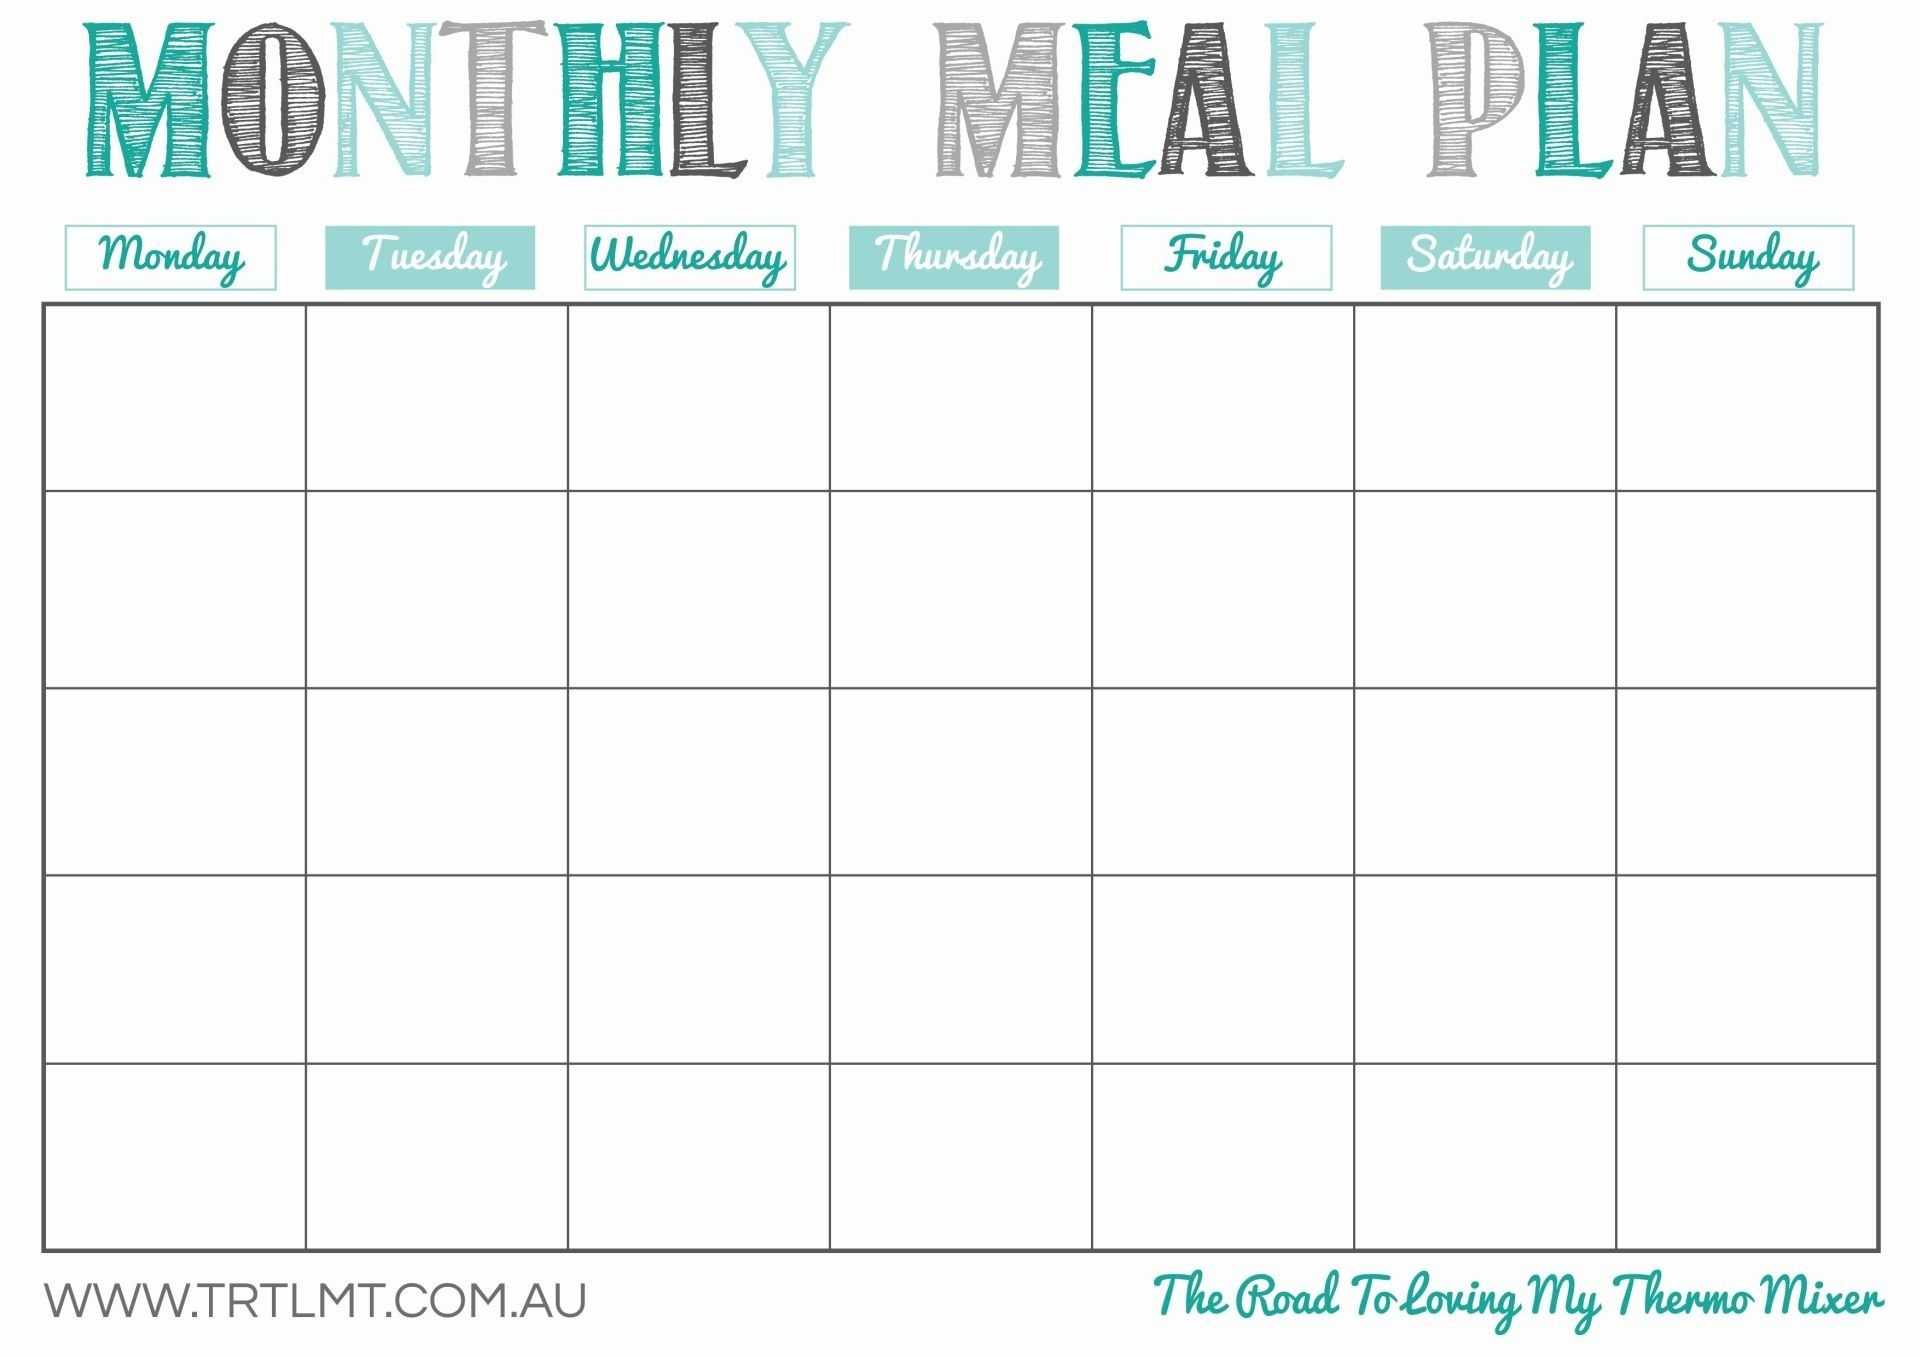 12 Meal Planner Template | Radaircars In Meal Plan Template Word